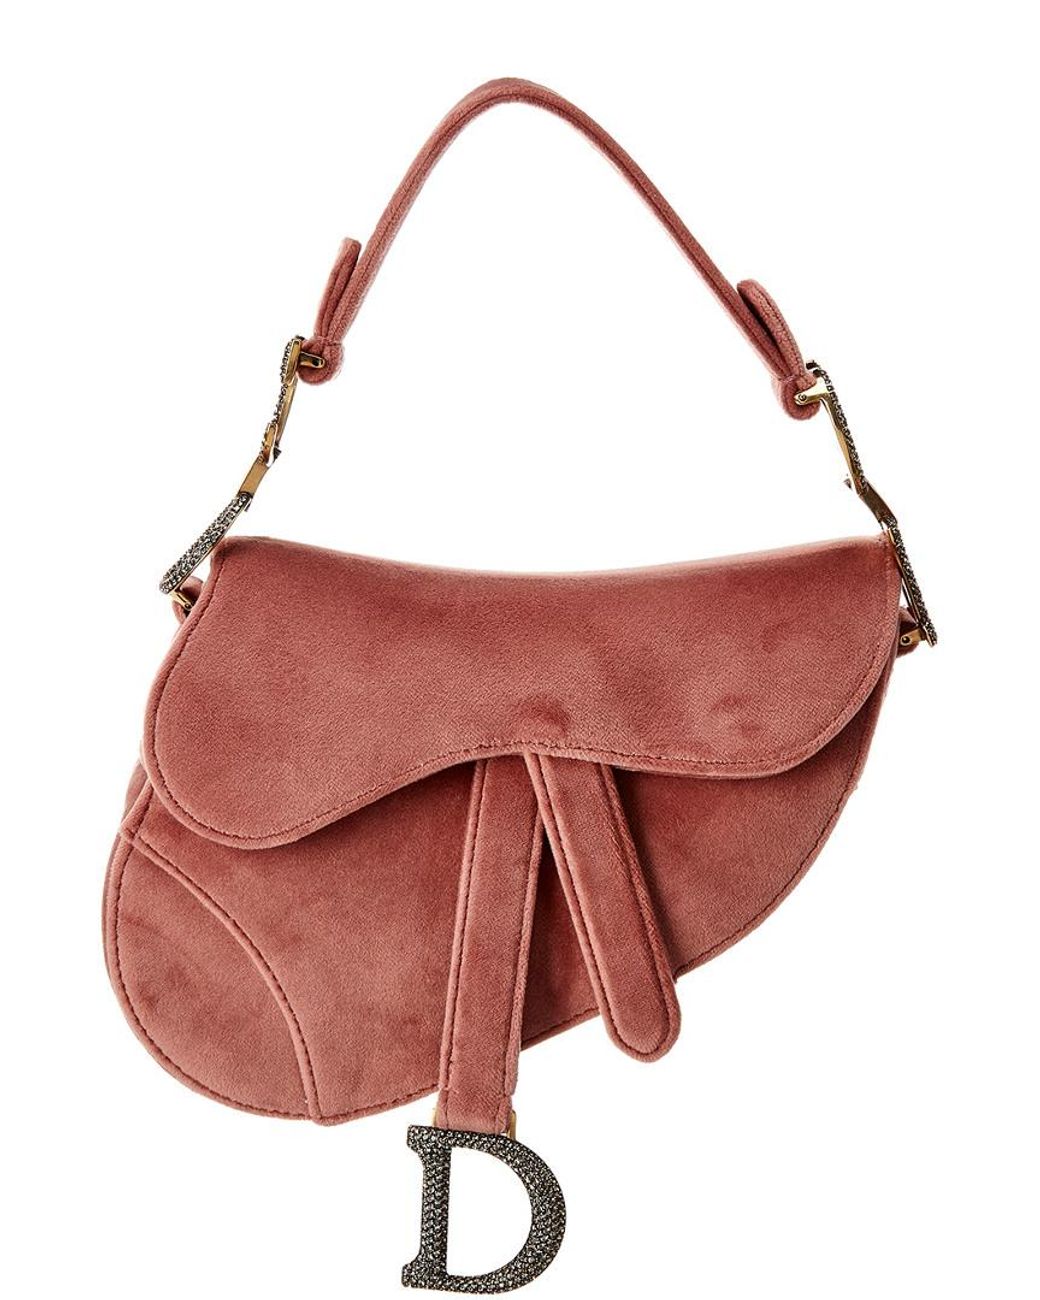 5 Reasons Why You Should Think Twice Before Selling Old Designer Handbags  Dior  Saddle Bag